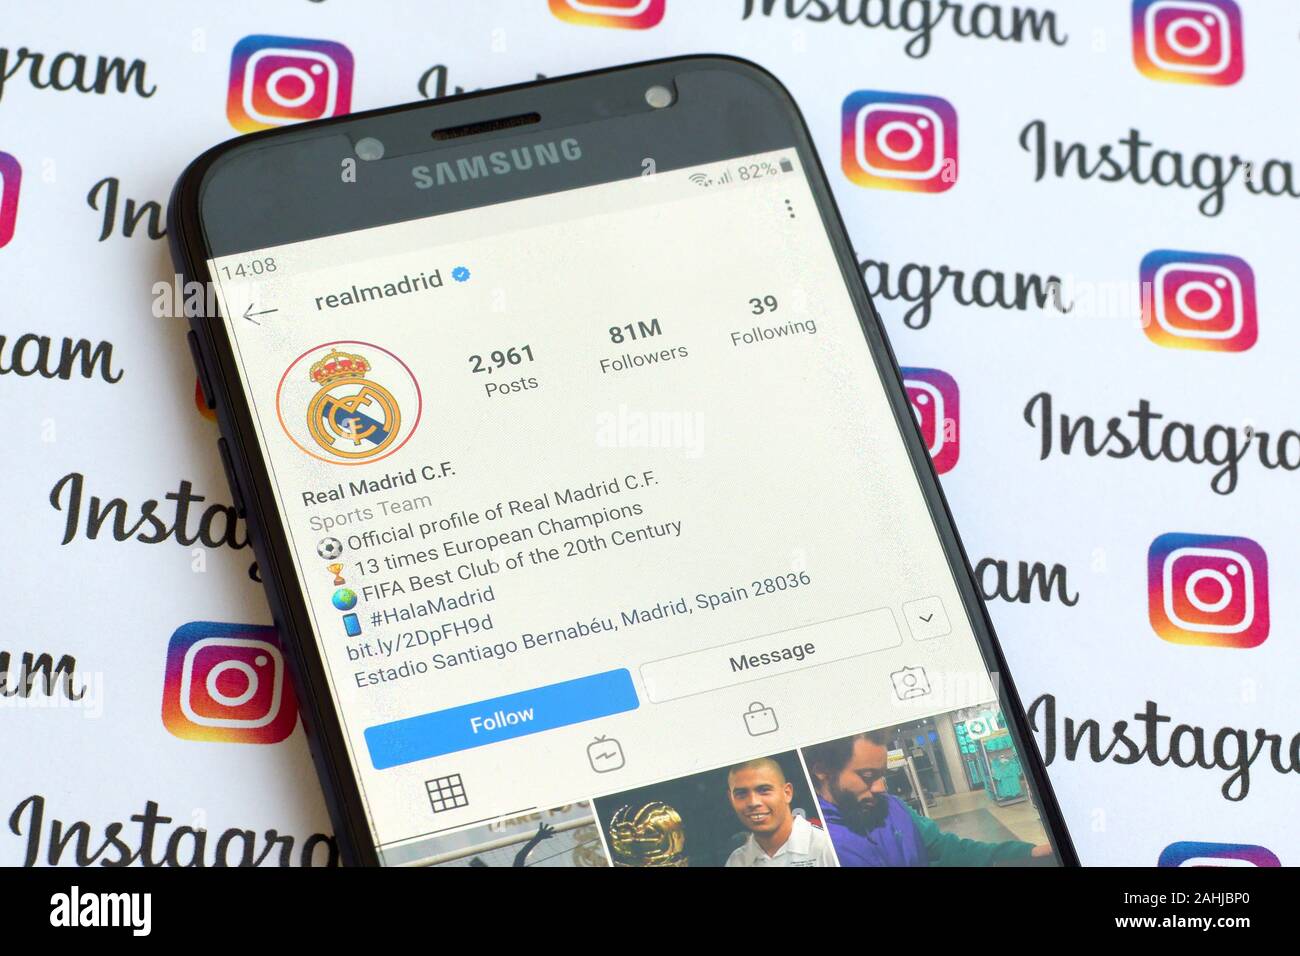 NY, USA - DECEMBER 4, 2019: Real Madrid official instagram account on smartphone screen on paper instagram banner. Stock Photo